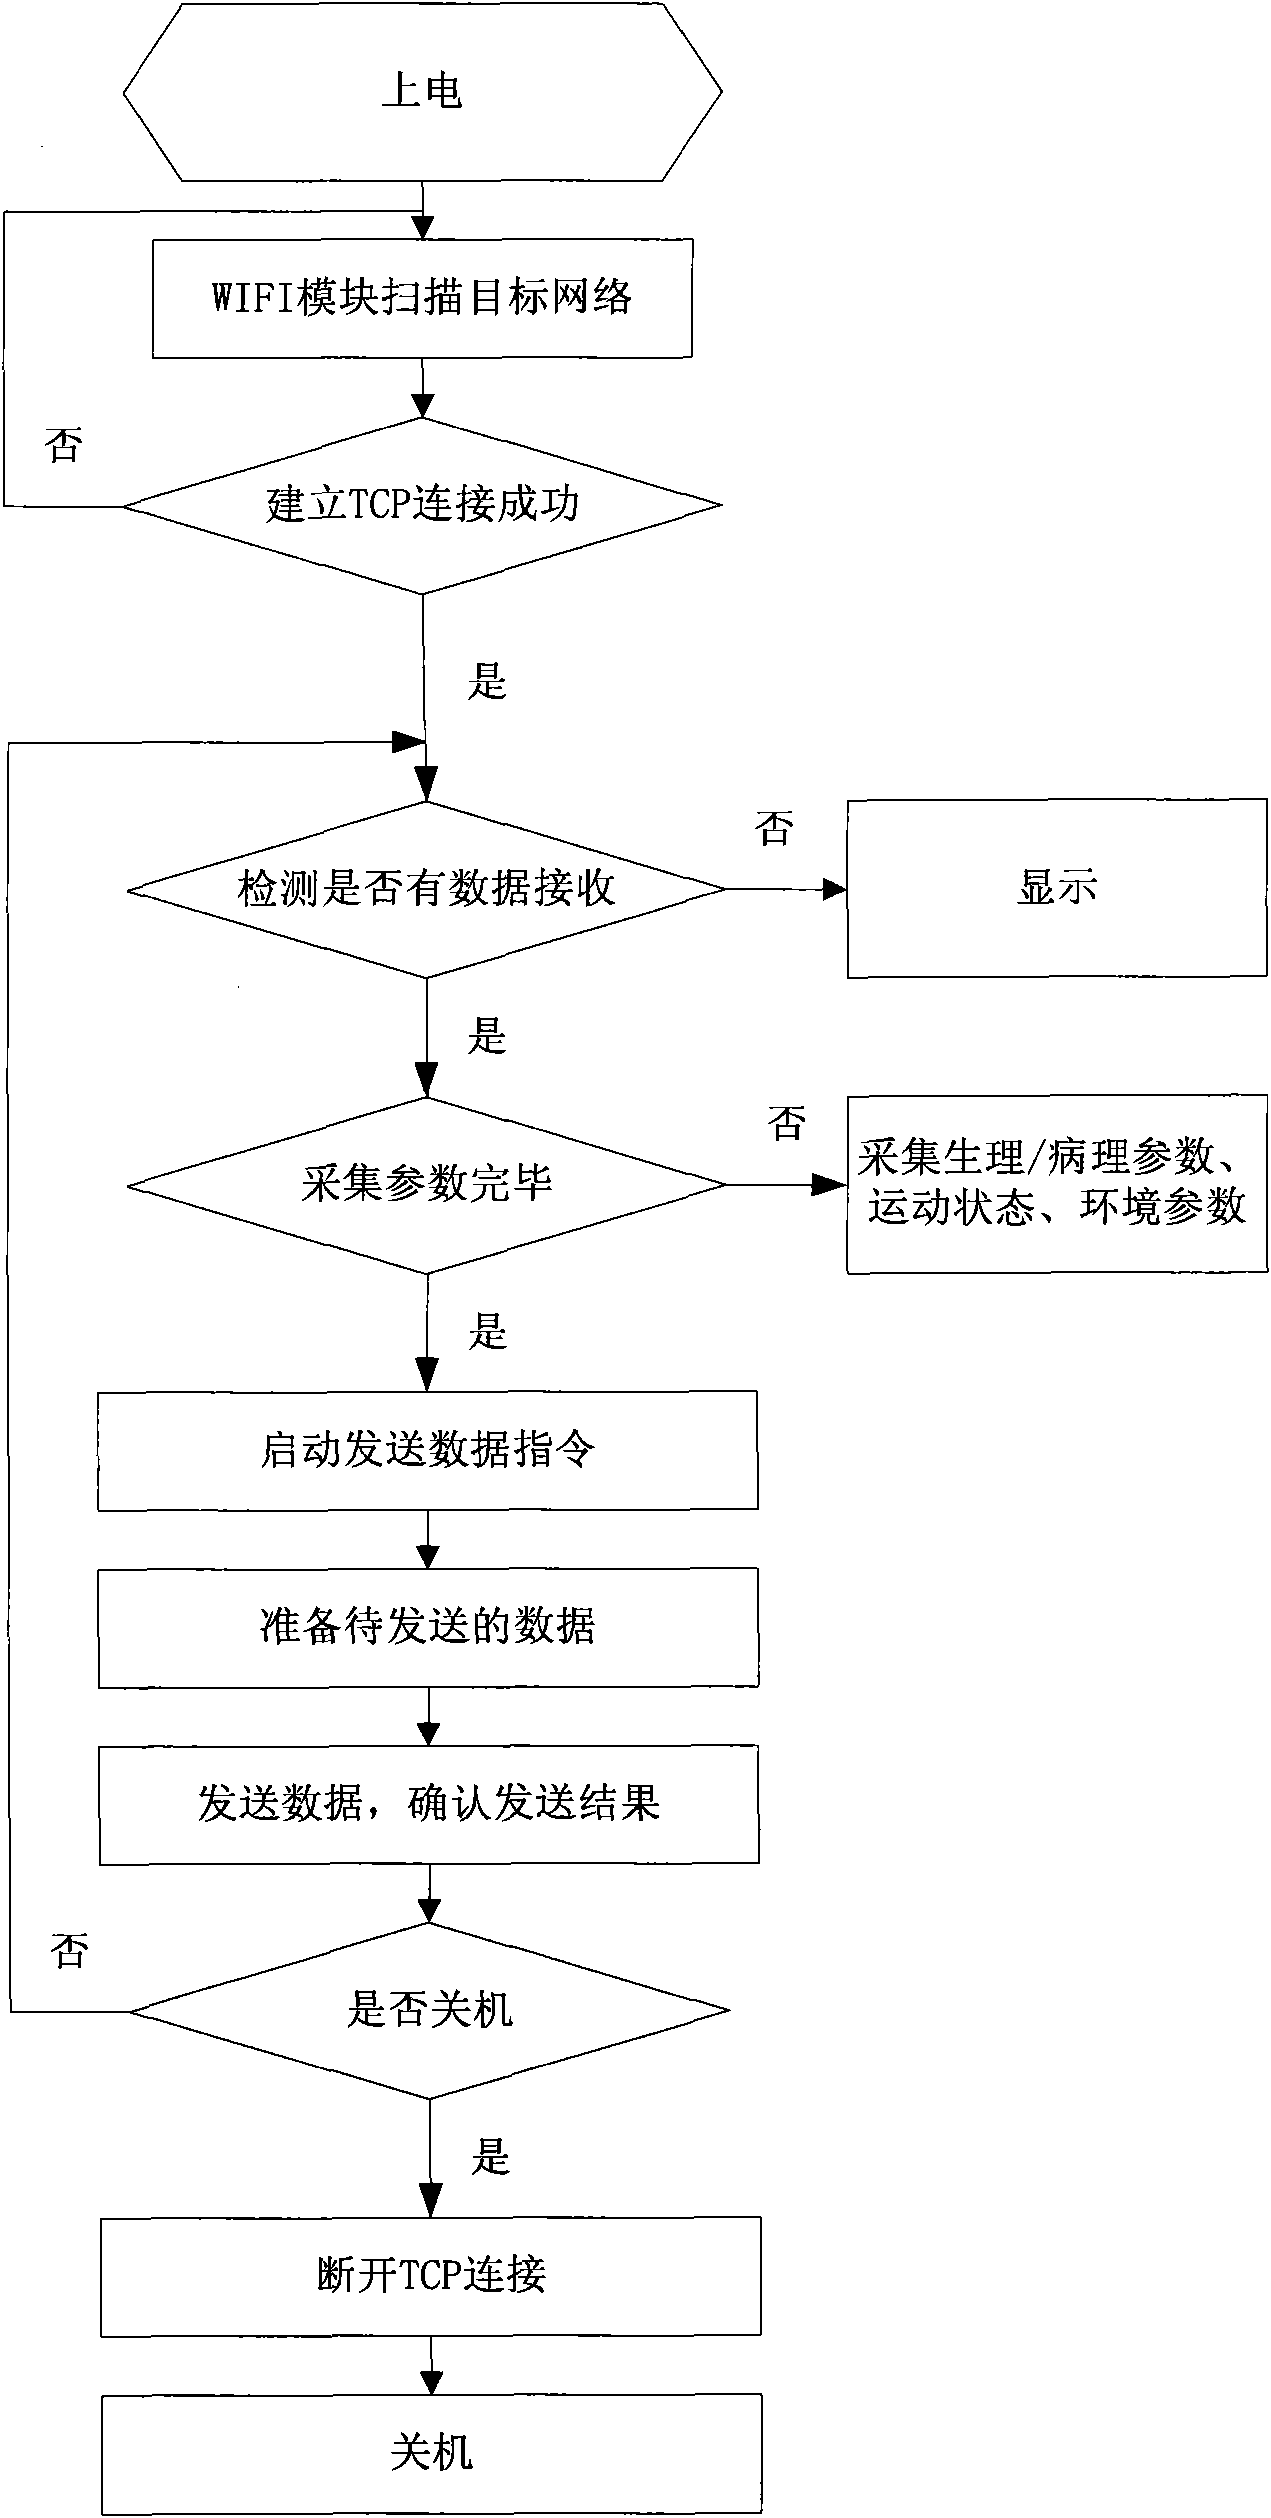 Remote medical service system using WLAN (Wireless Local Area Network) standard and method thereof